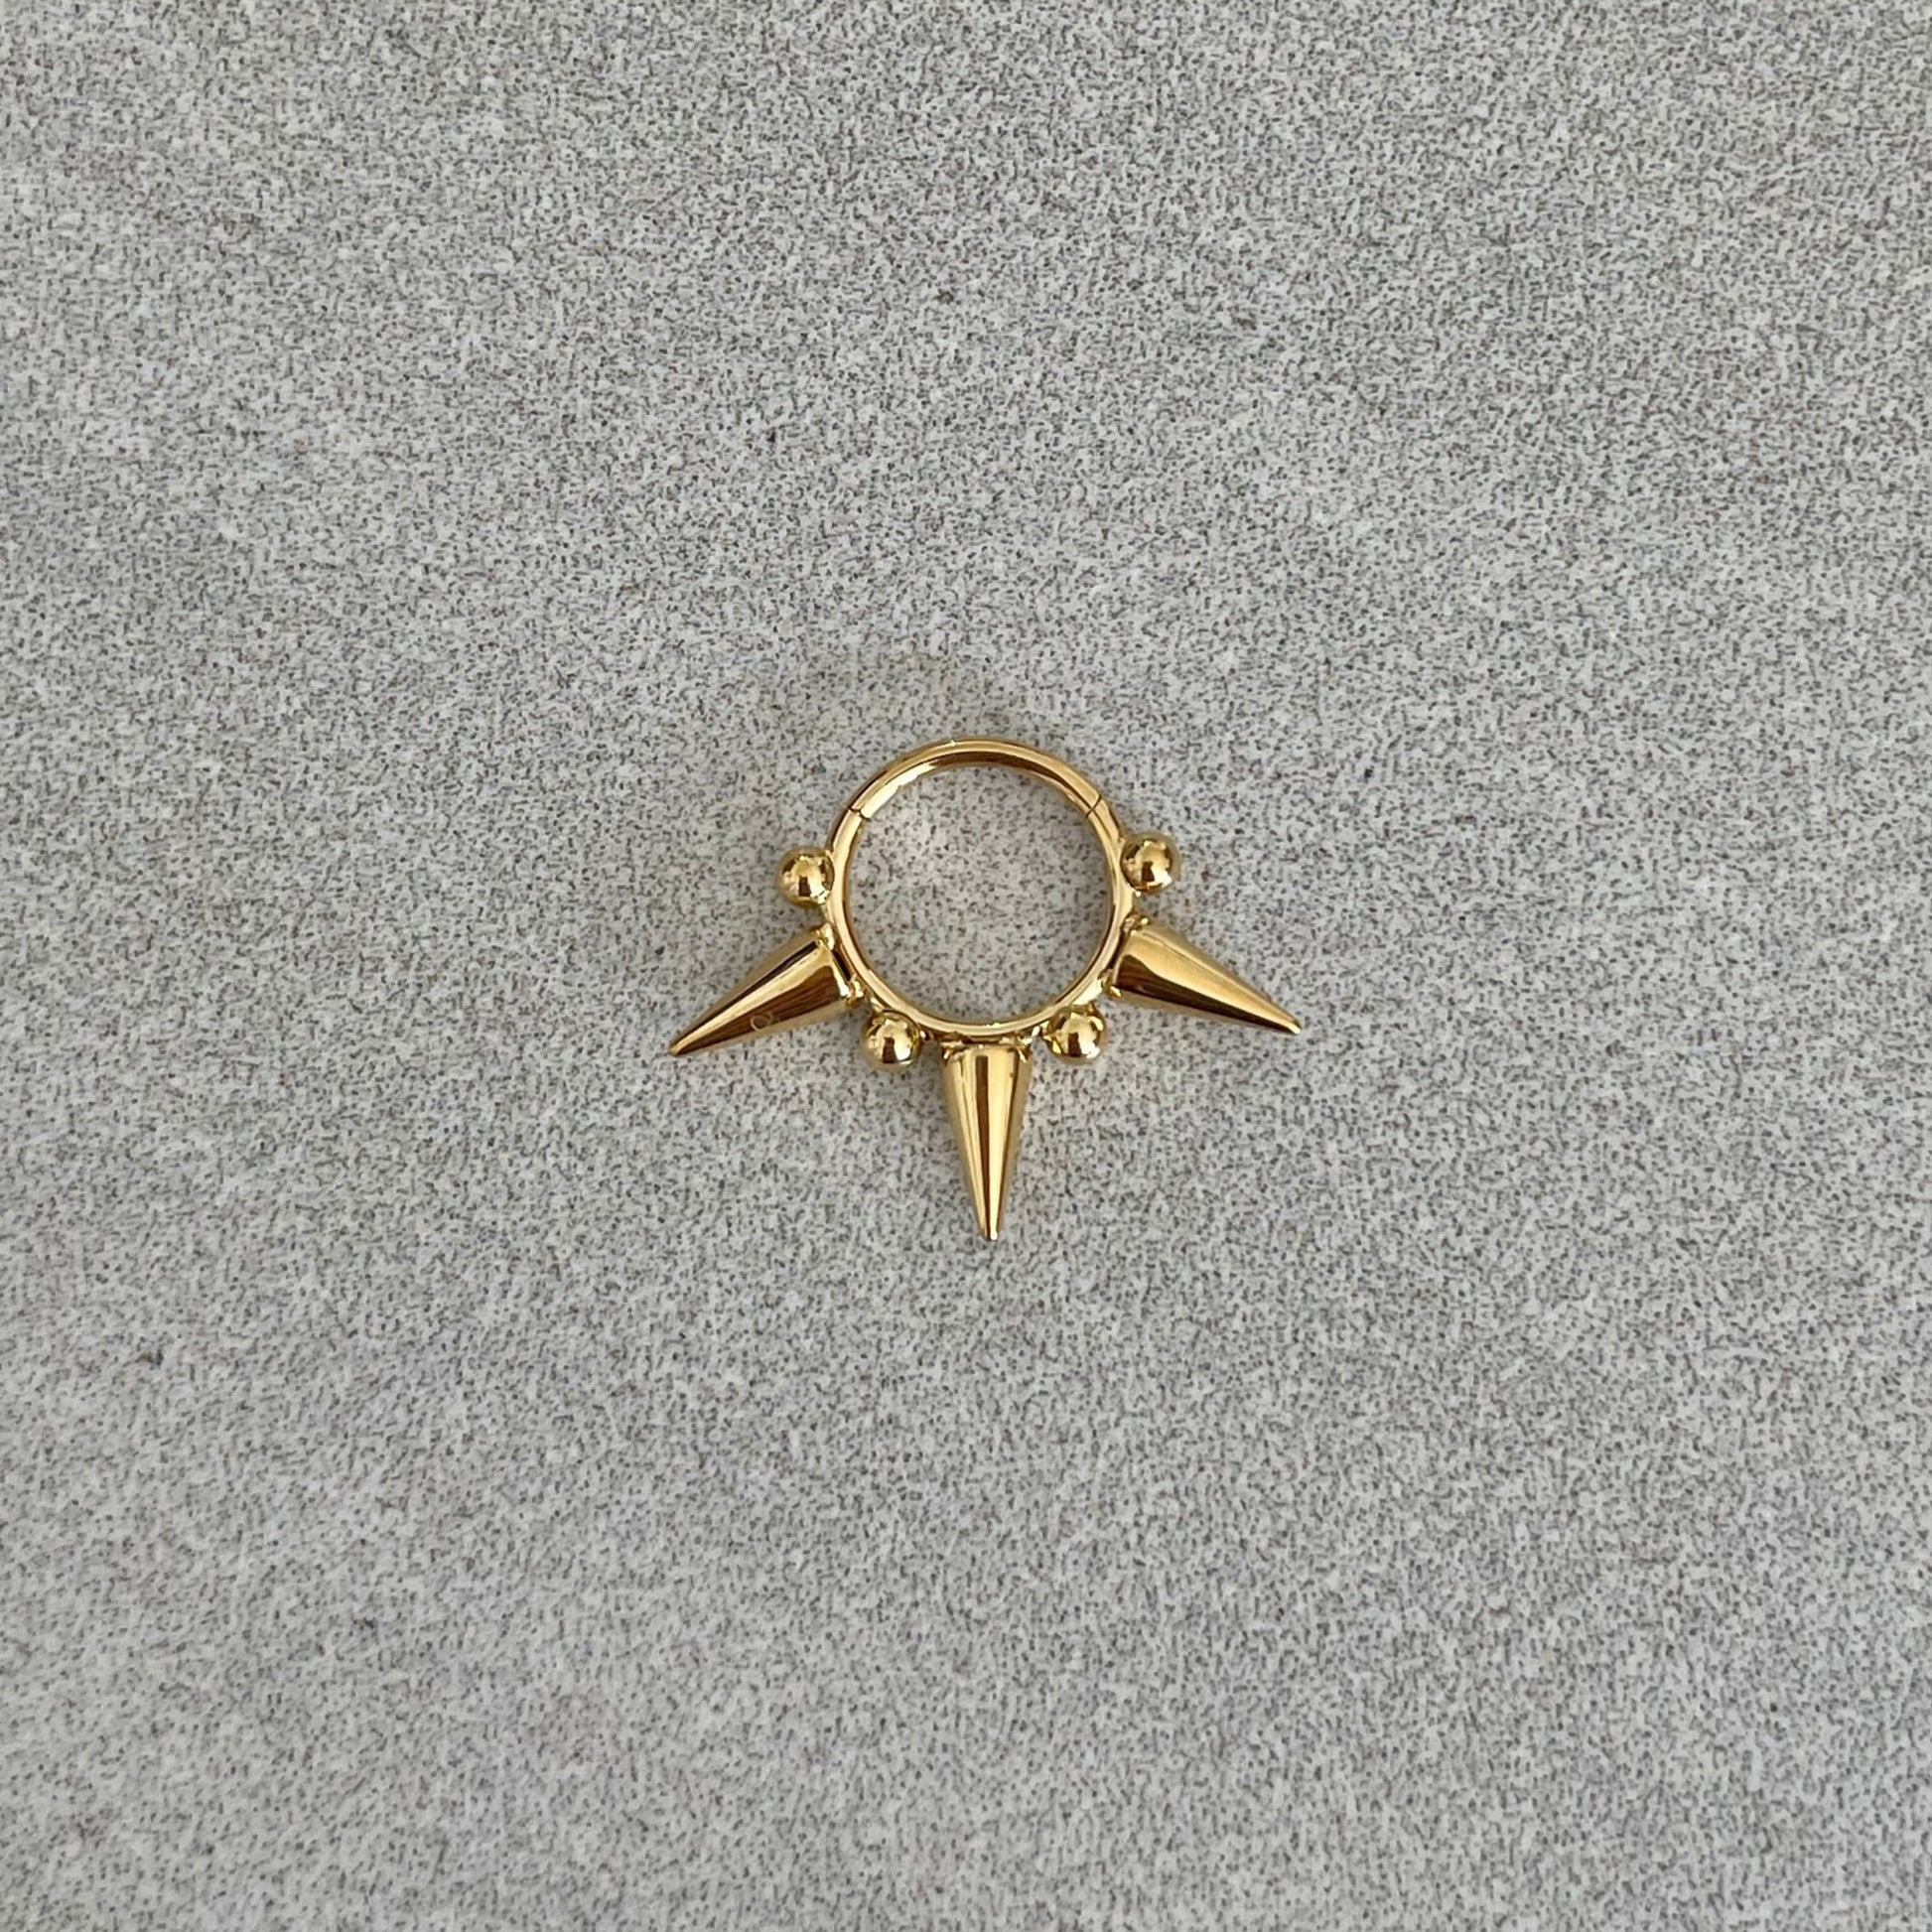 Gold Spike Daith Earring (16G or 18G | 8mm or 10mm | Surgical Steel | Gold, Silver or Black)